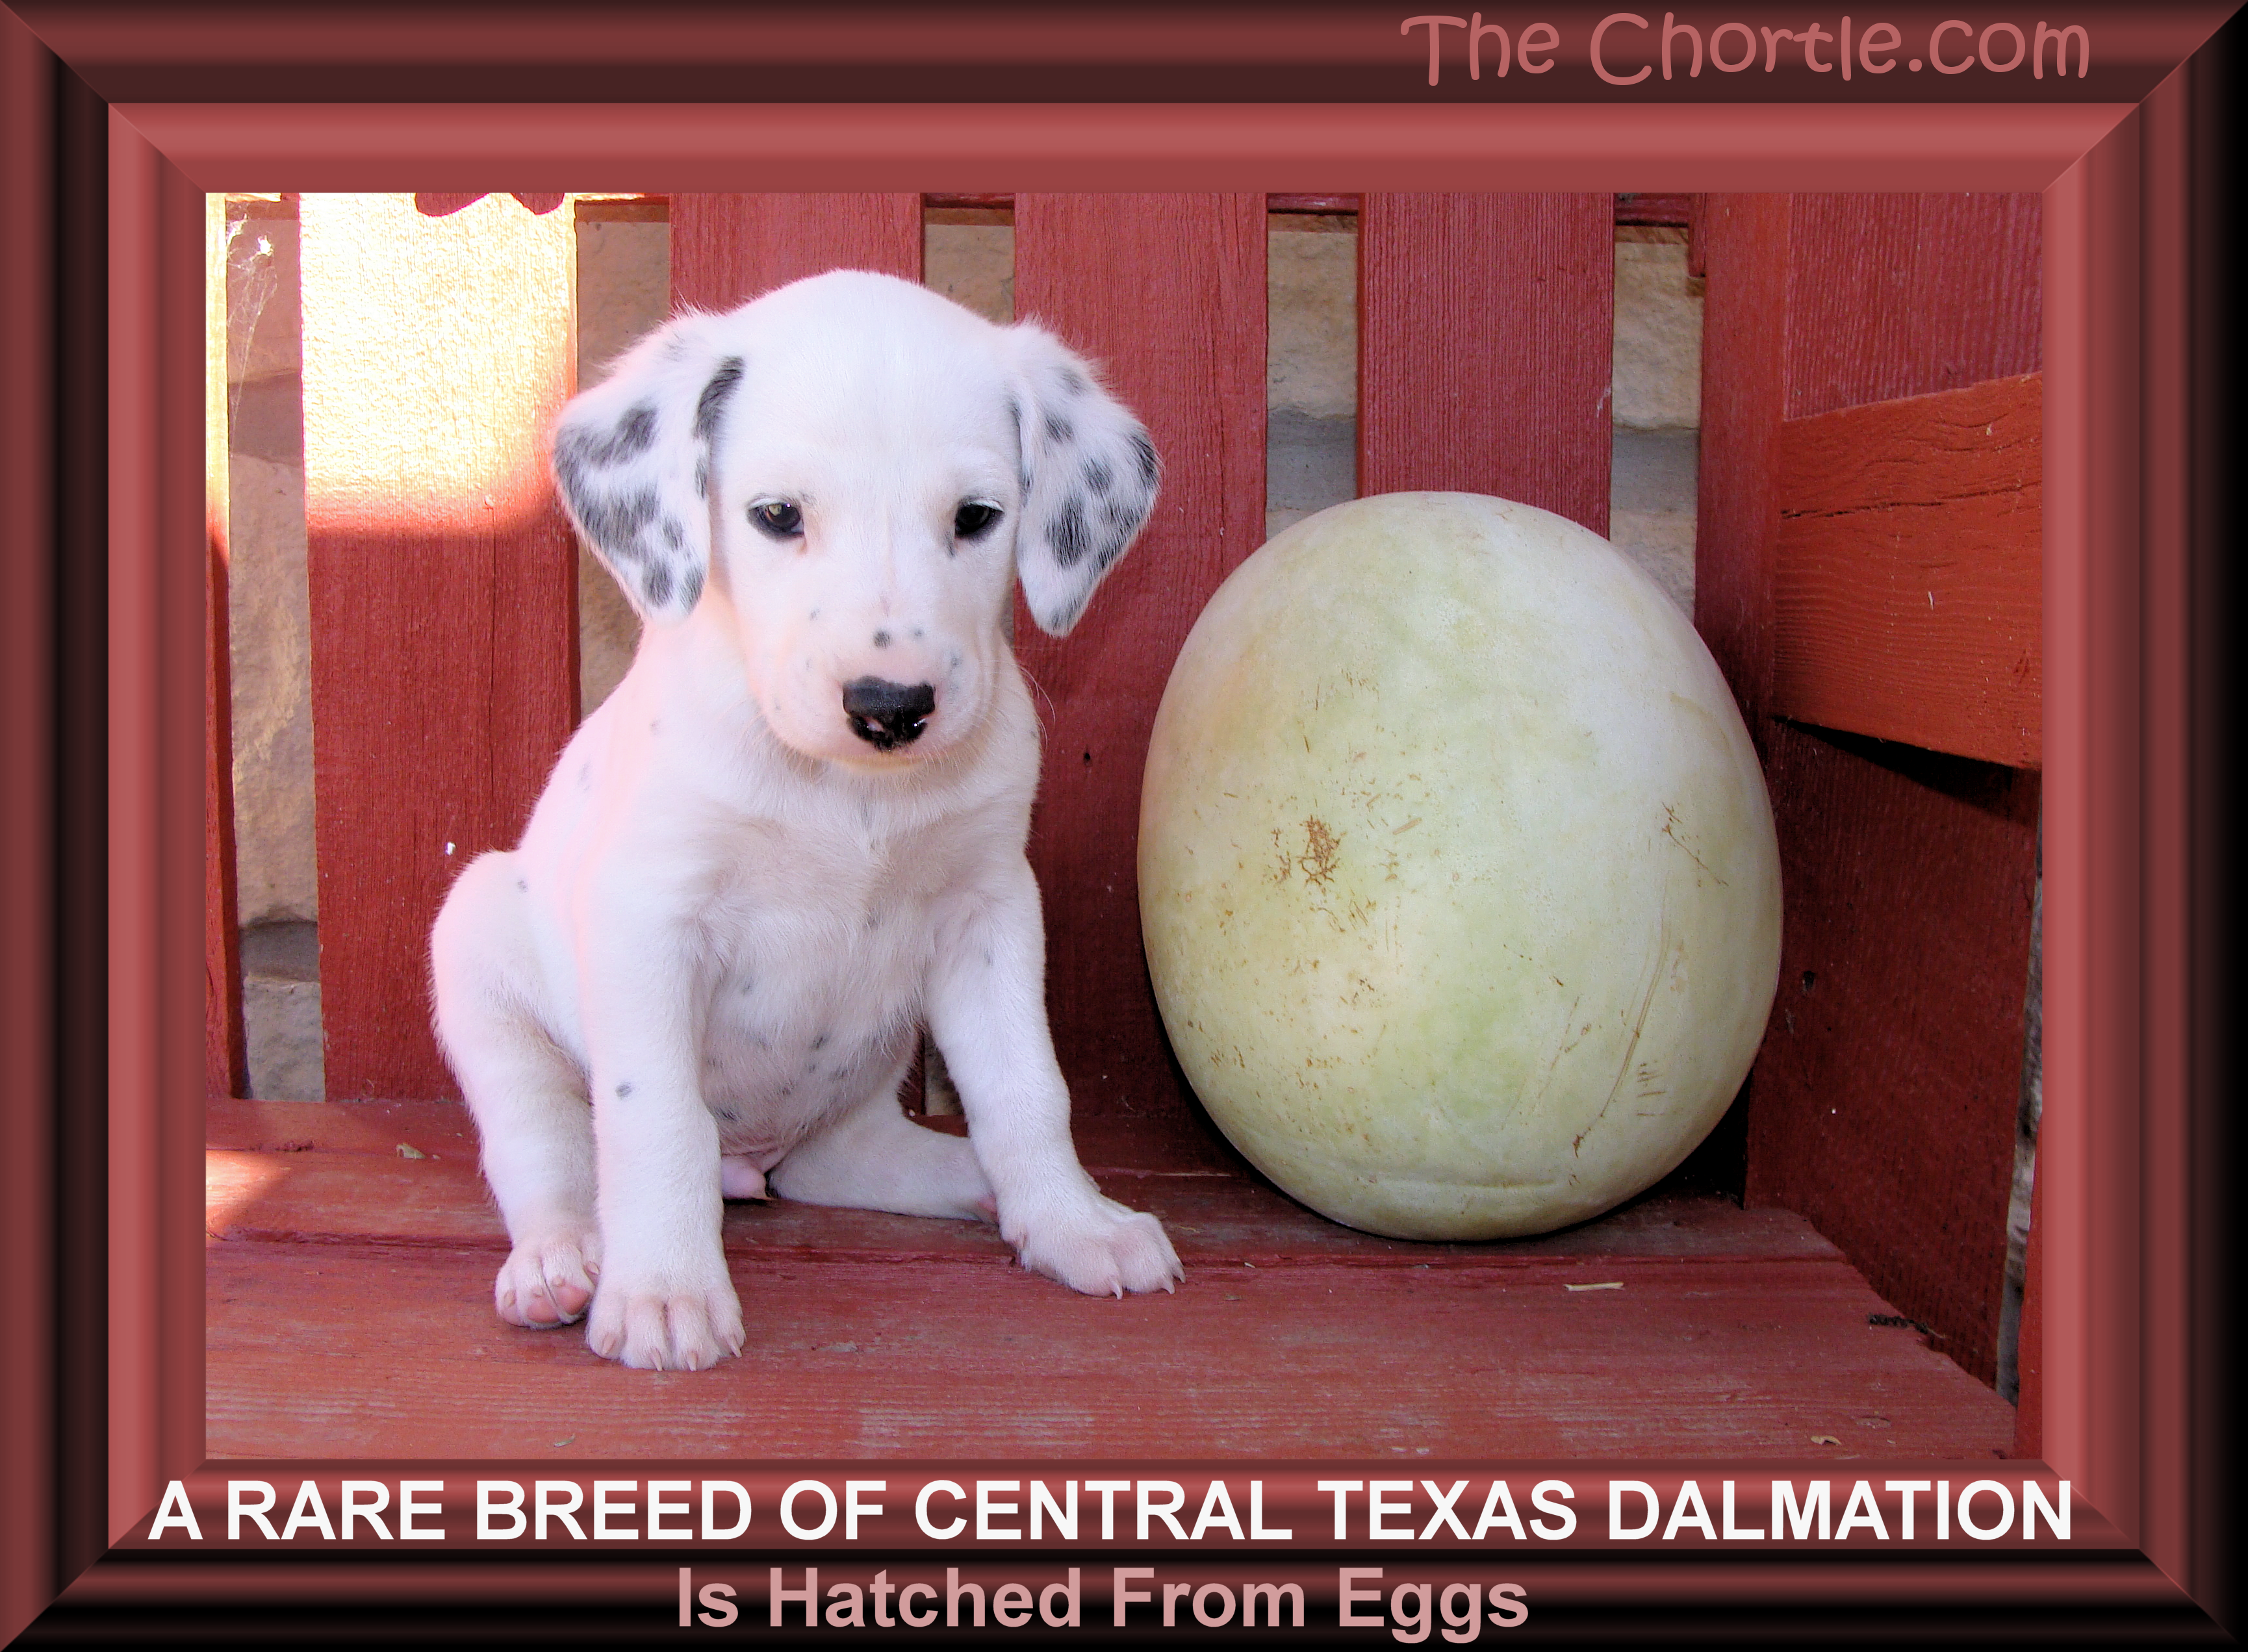 A rare breed of central Texas dalmation is hatched from eggs.